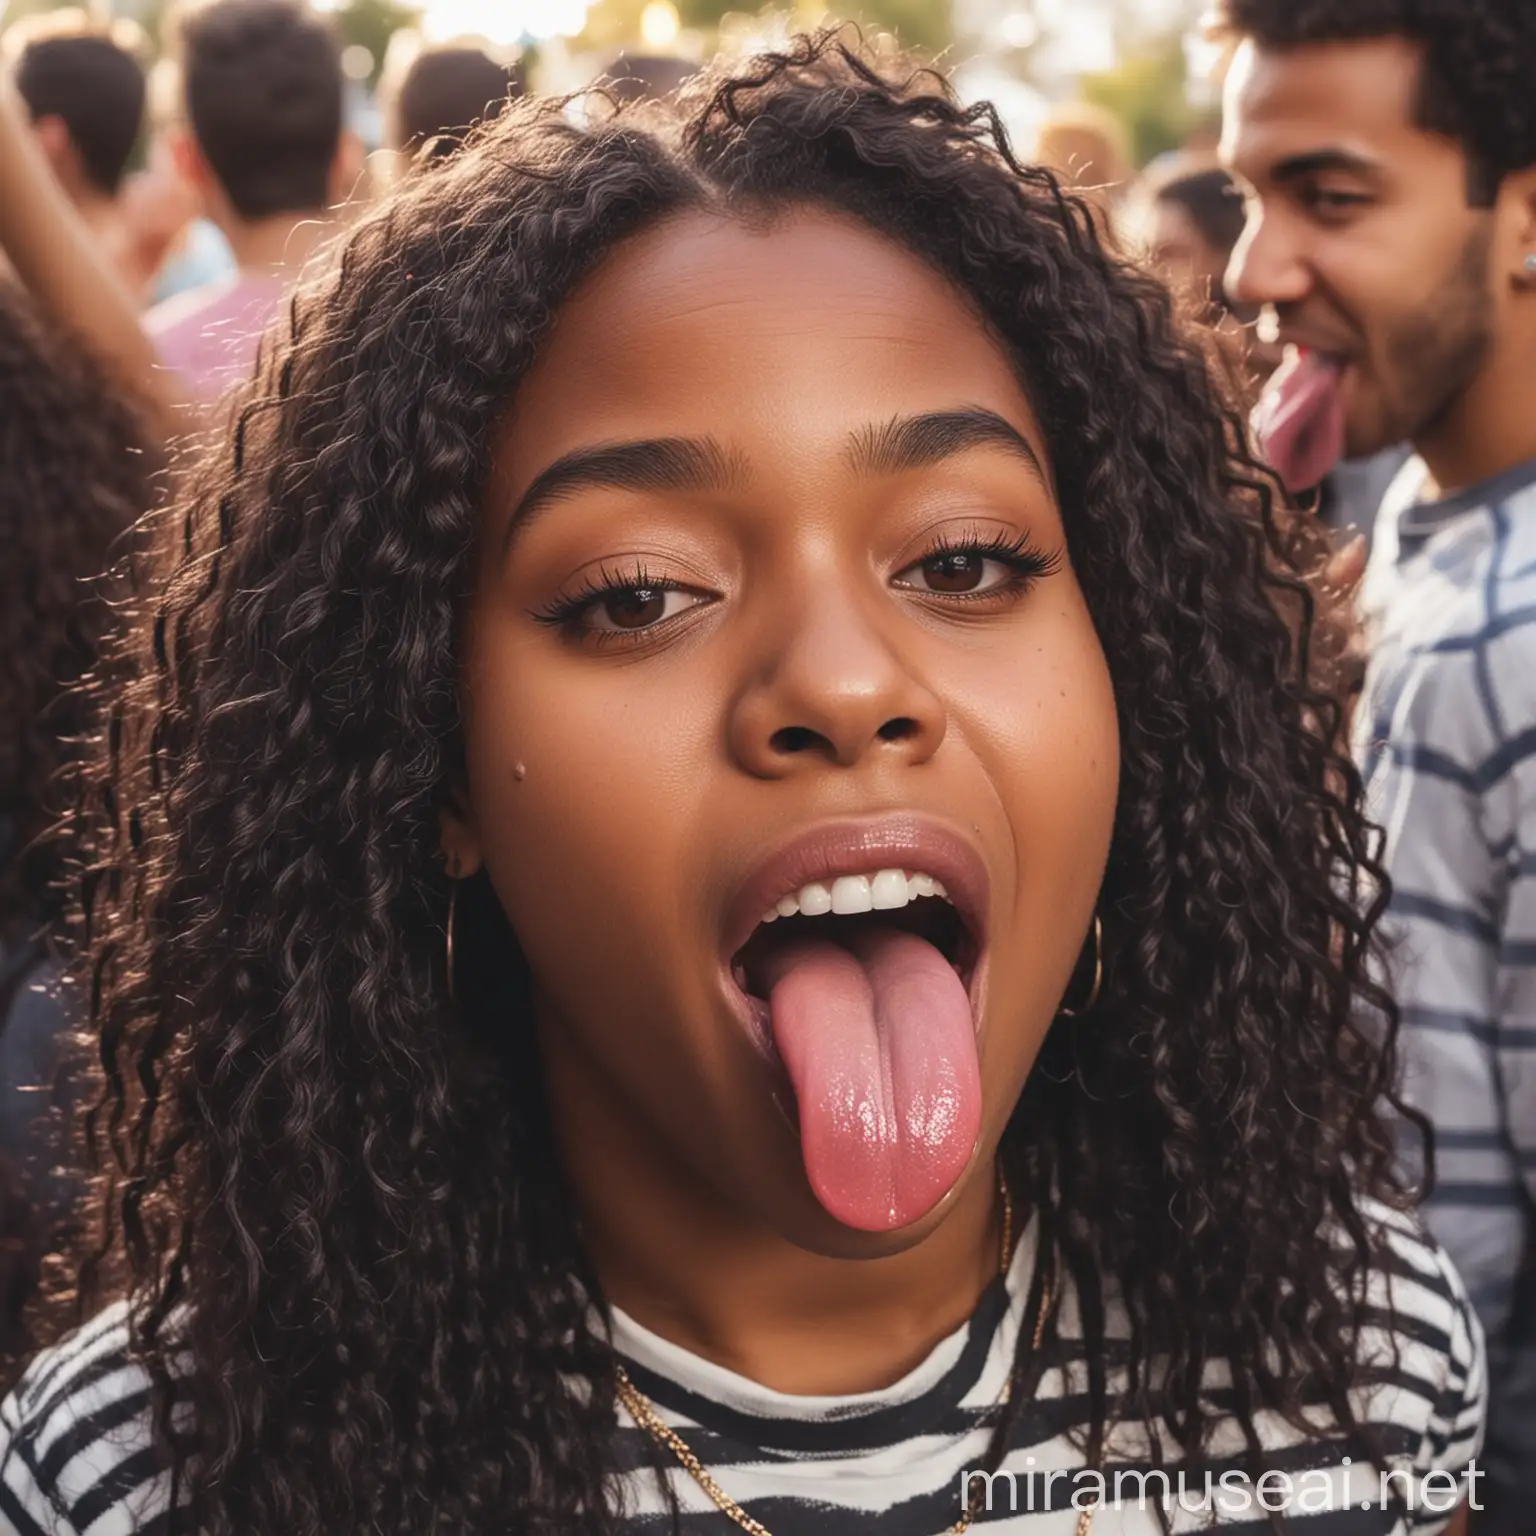 Black girl, sticking her tongue out, at a party